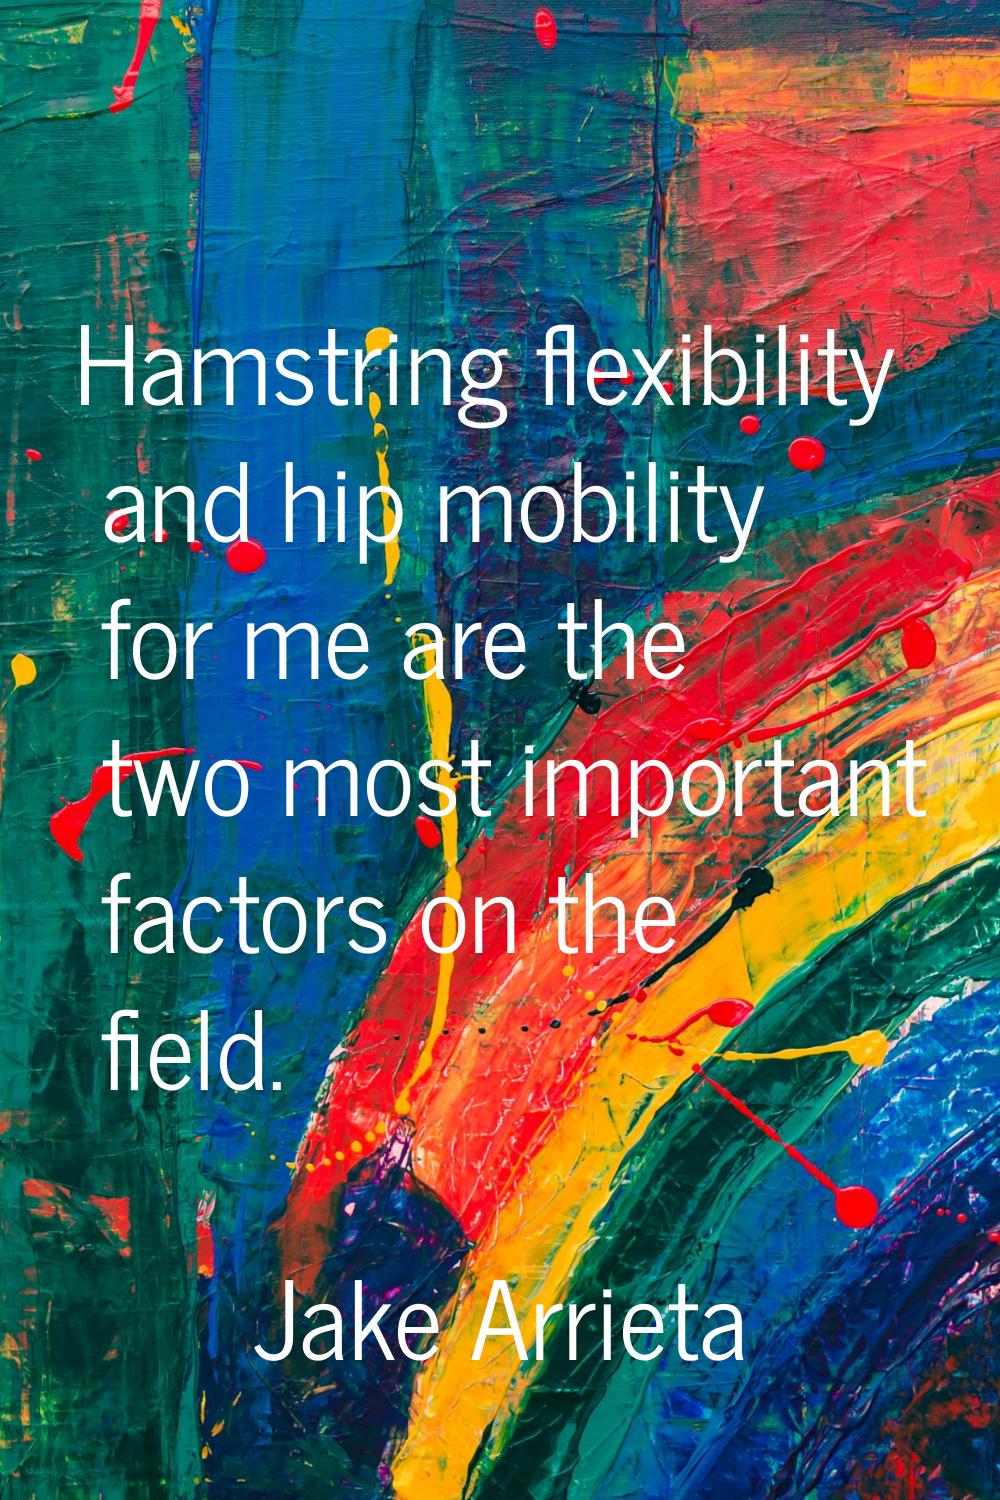 Hamstring flexibility and hip mobility for me are the two most important factors on the field.